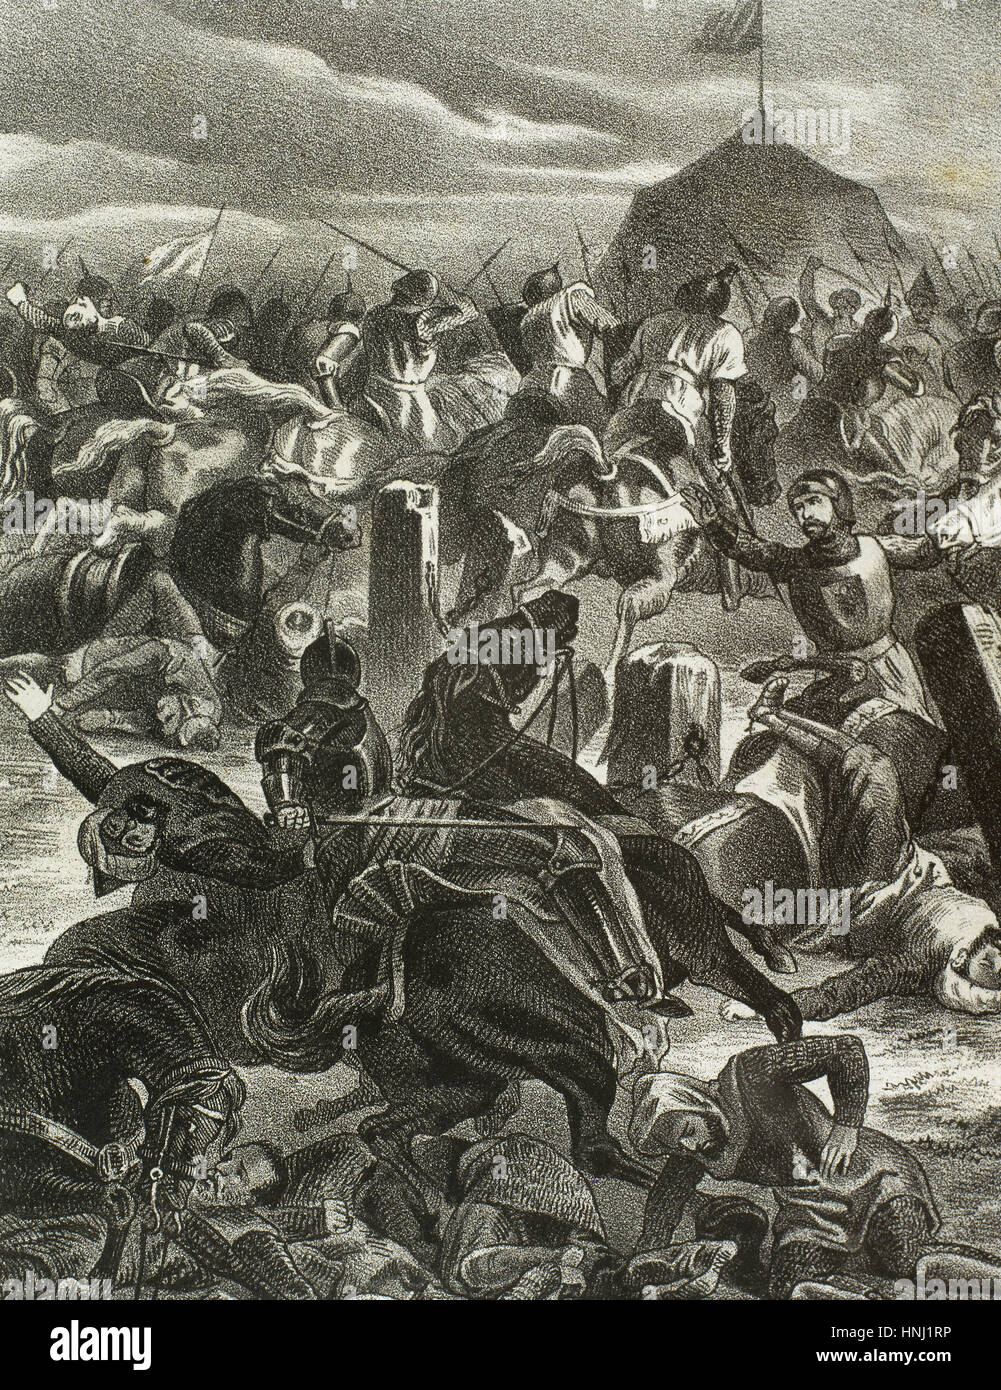 Spain. Battle of Las Navas de Tolosa (1212) in which Alfonso VIII of Castile defeated the Almohad army of Caliph al-Nasir Muhammed. Engraving. Stock Photo